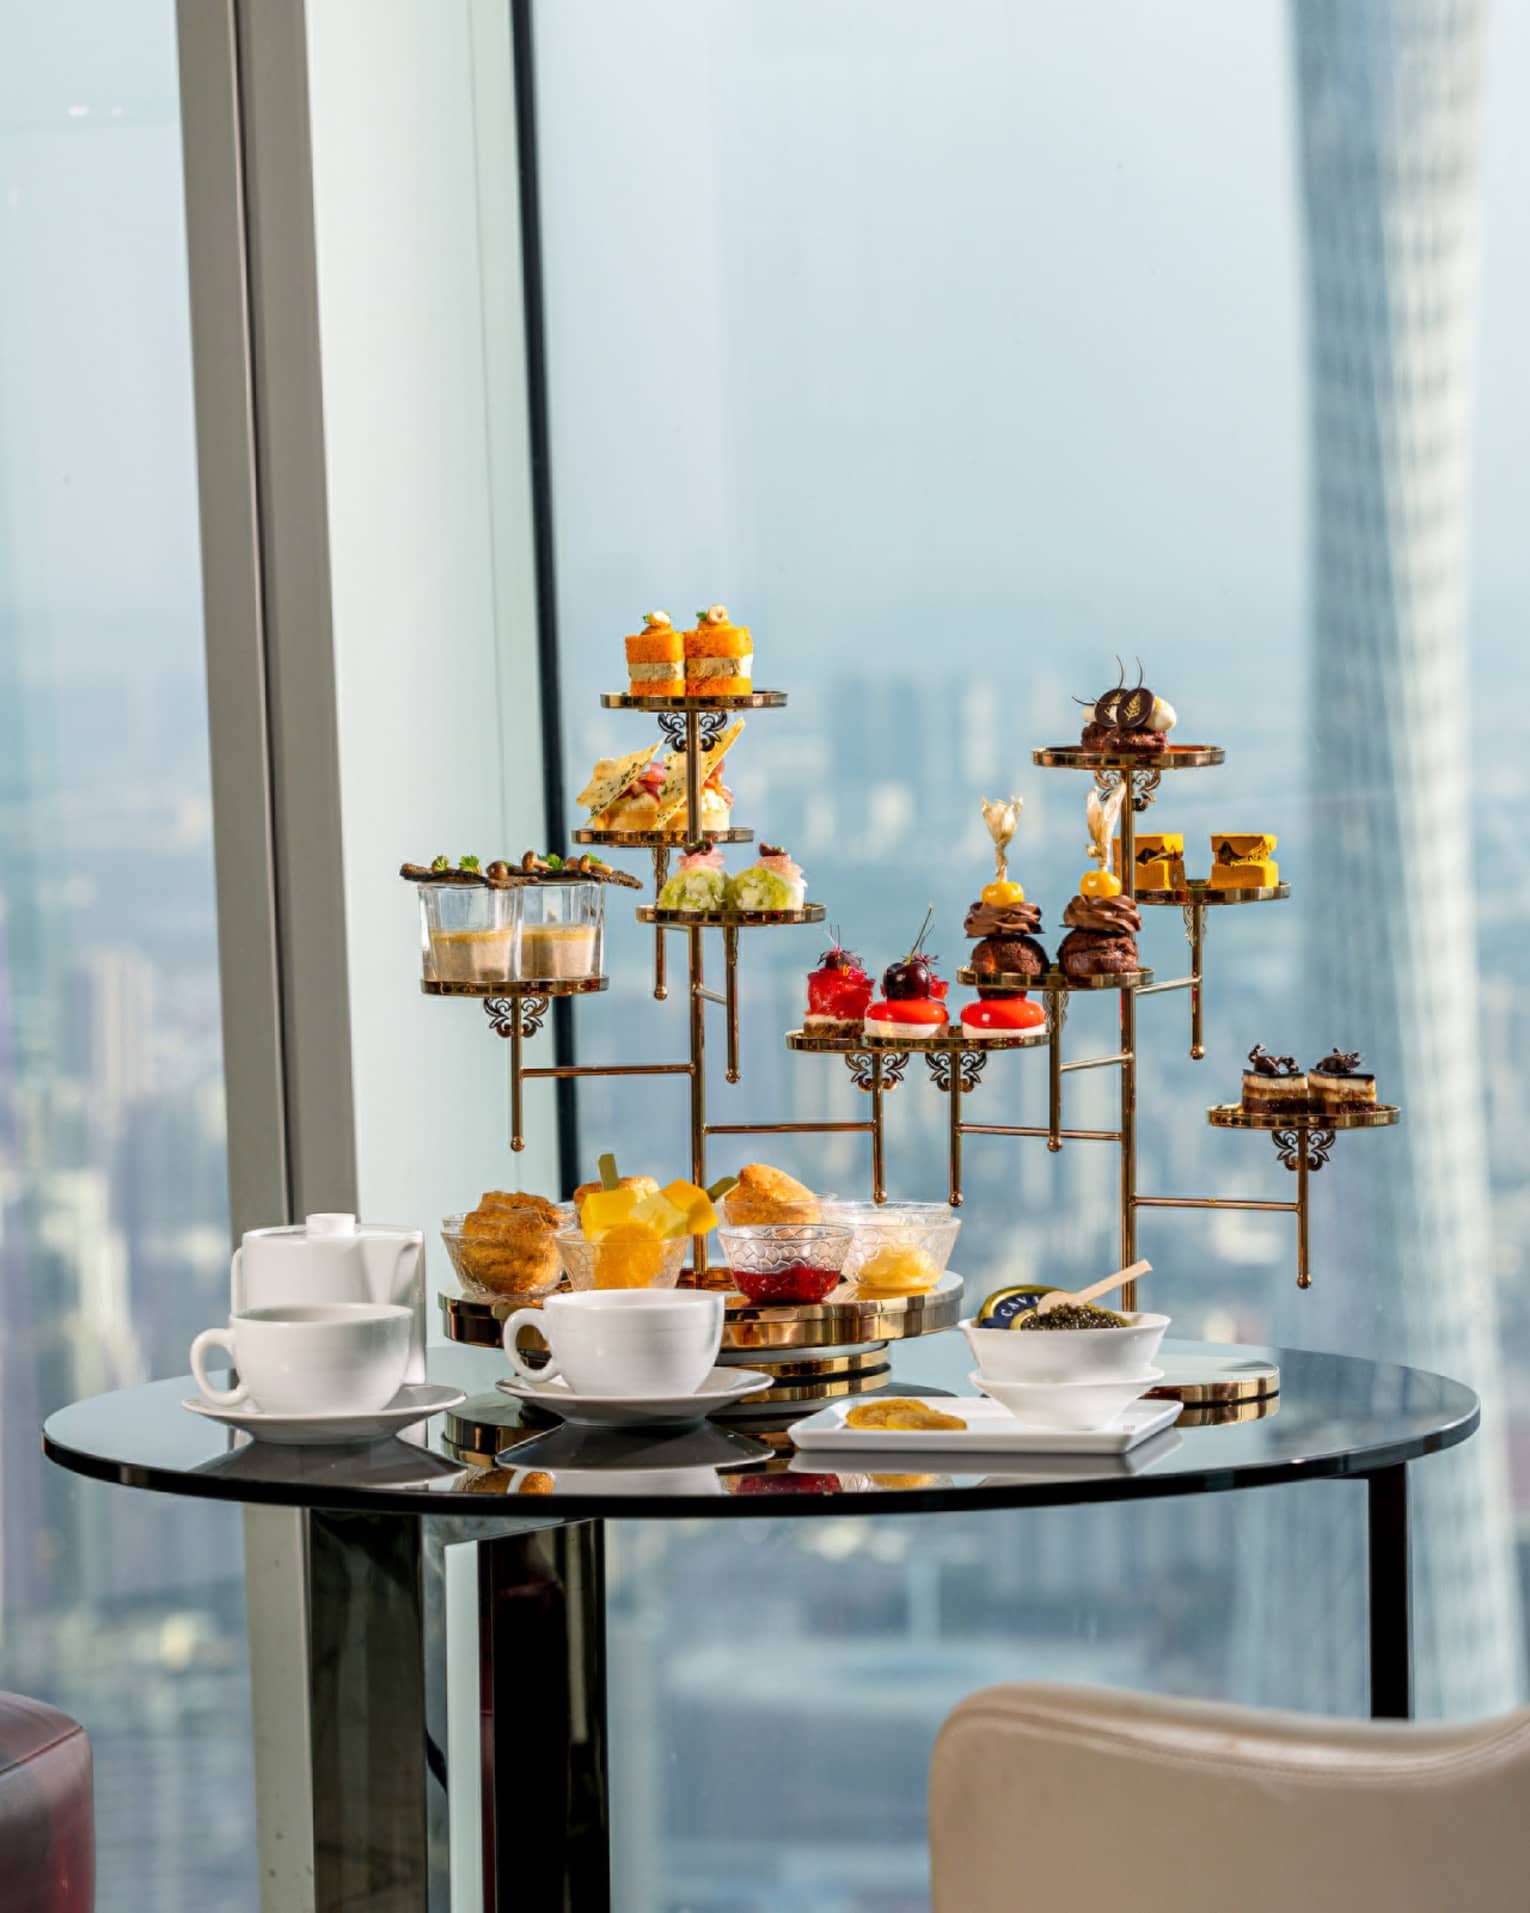 Afternoon Tea sweets tower at the Atrium with views of downtown Guangzhou